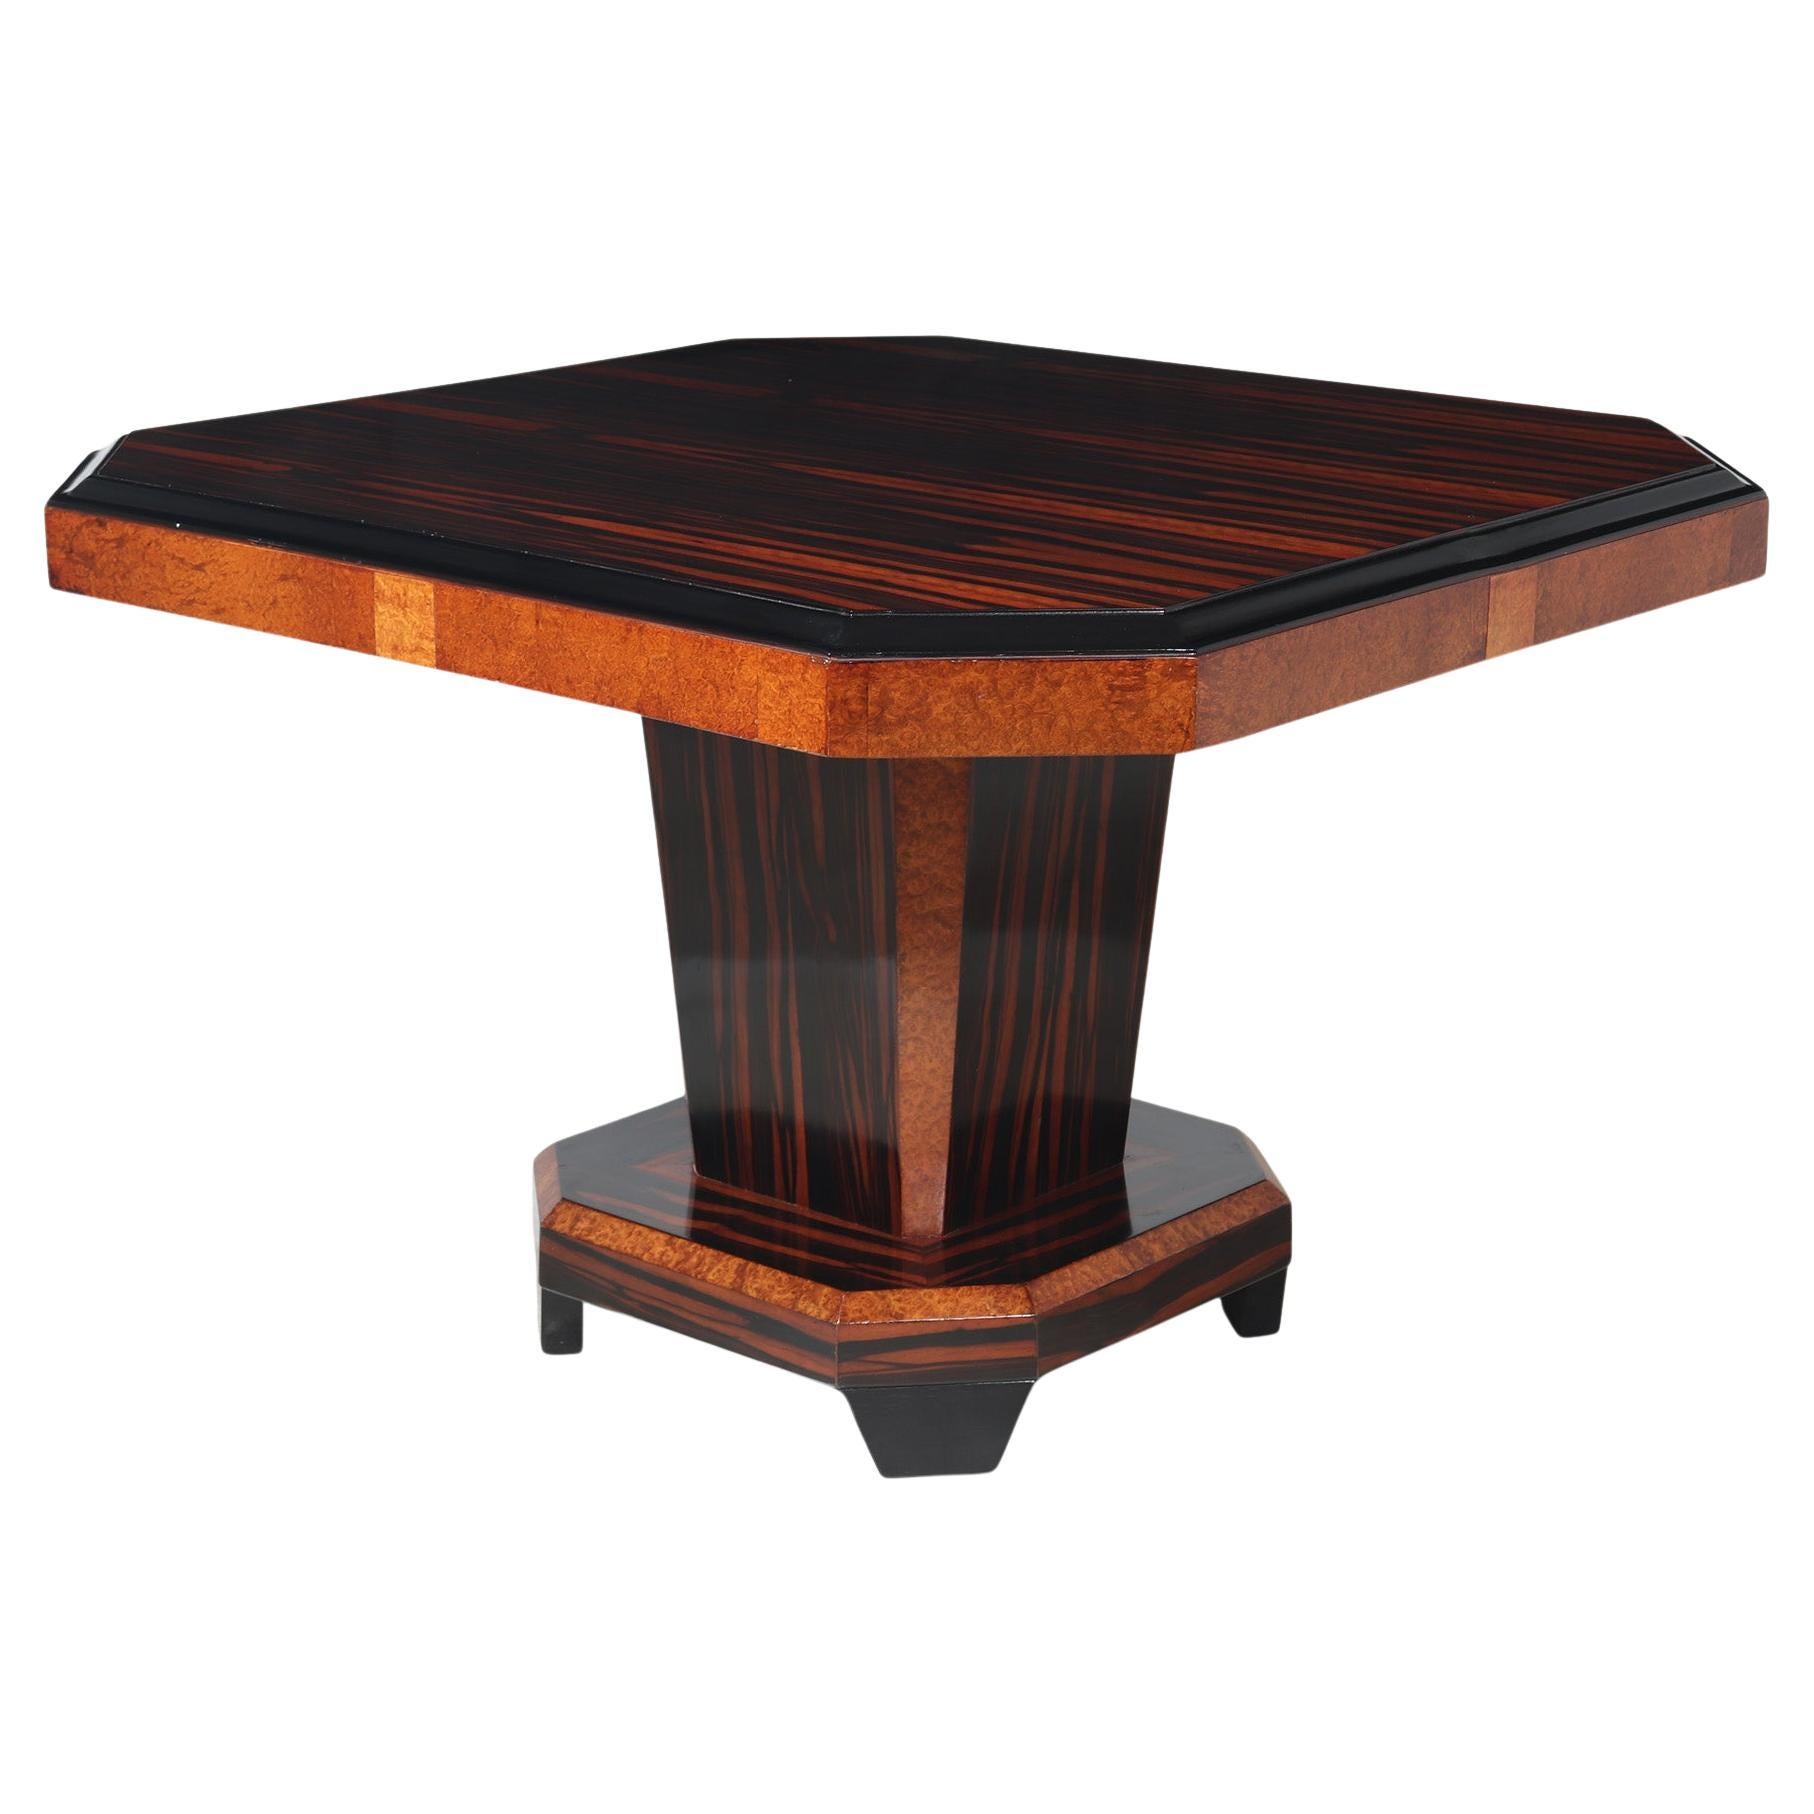 French Art Deco Dining Table in Macassar Ebony and Amboyna